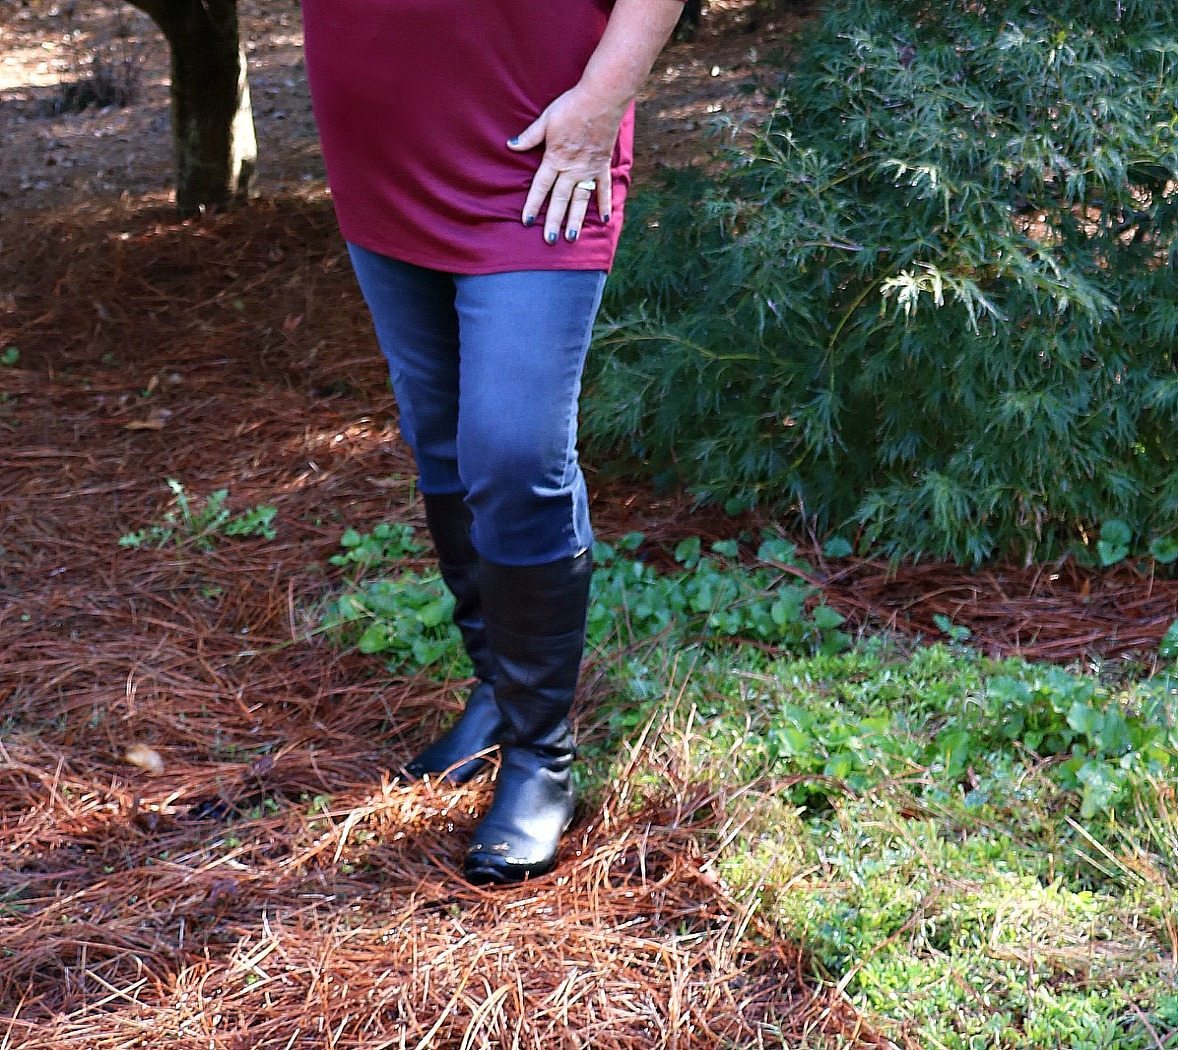 the-top-is-long-enough-to-wear-with-leggings-glamour-farms-harper-mainstay-sueded-top-burgundy-l